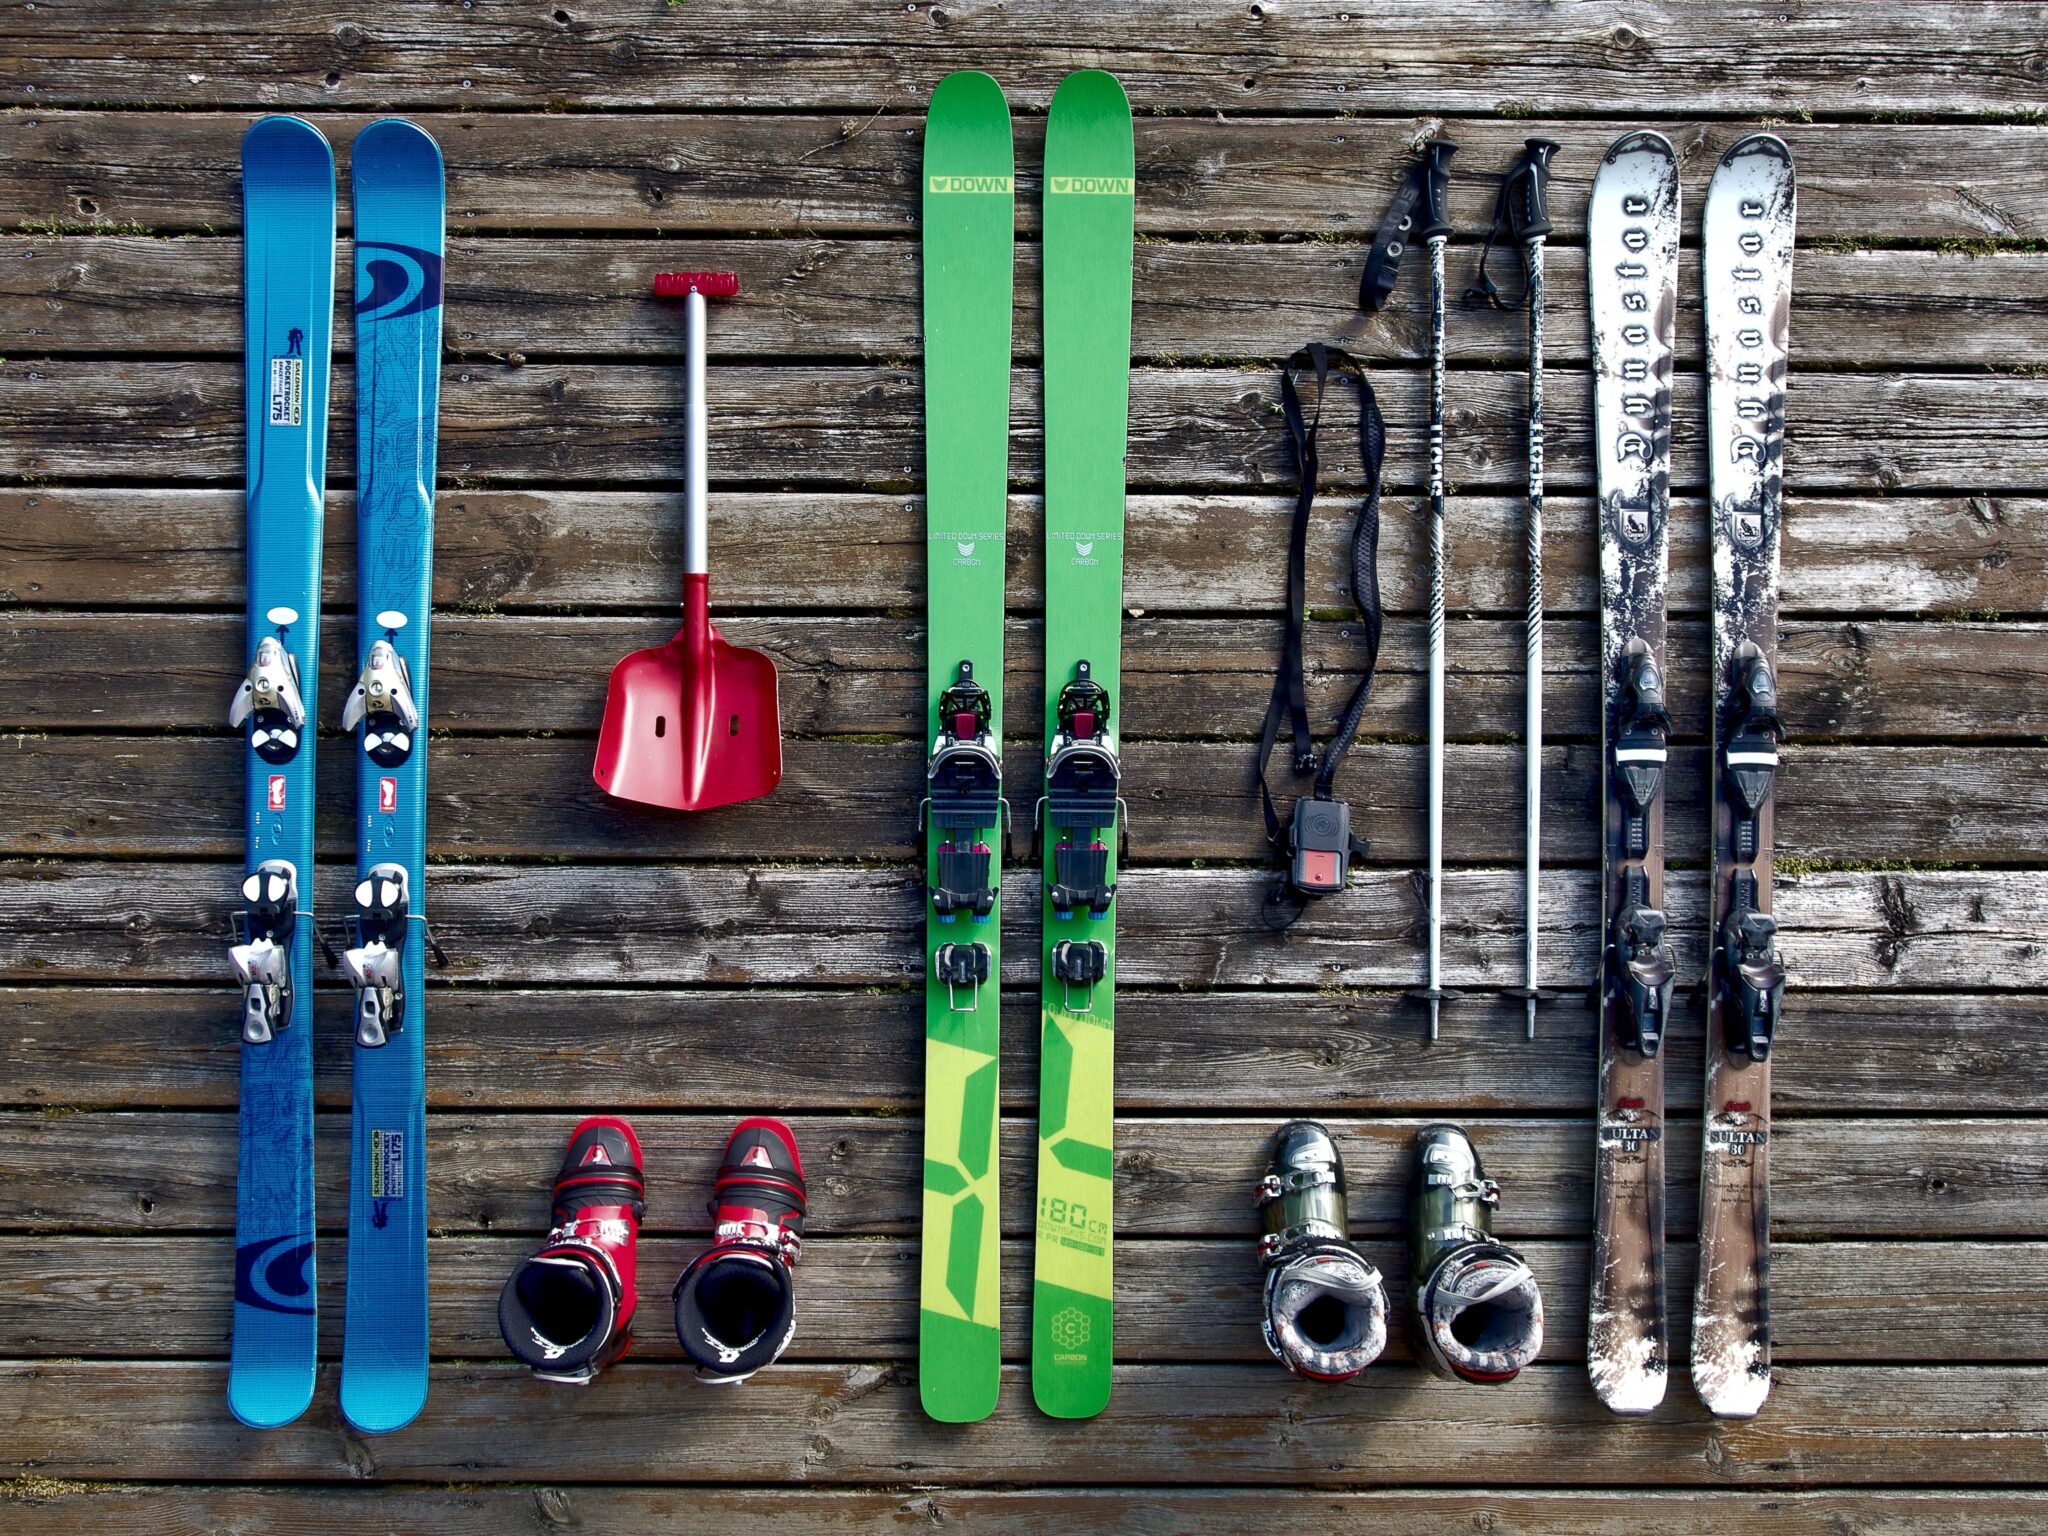 skiis and boots for downhill skiing